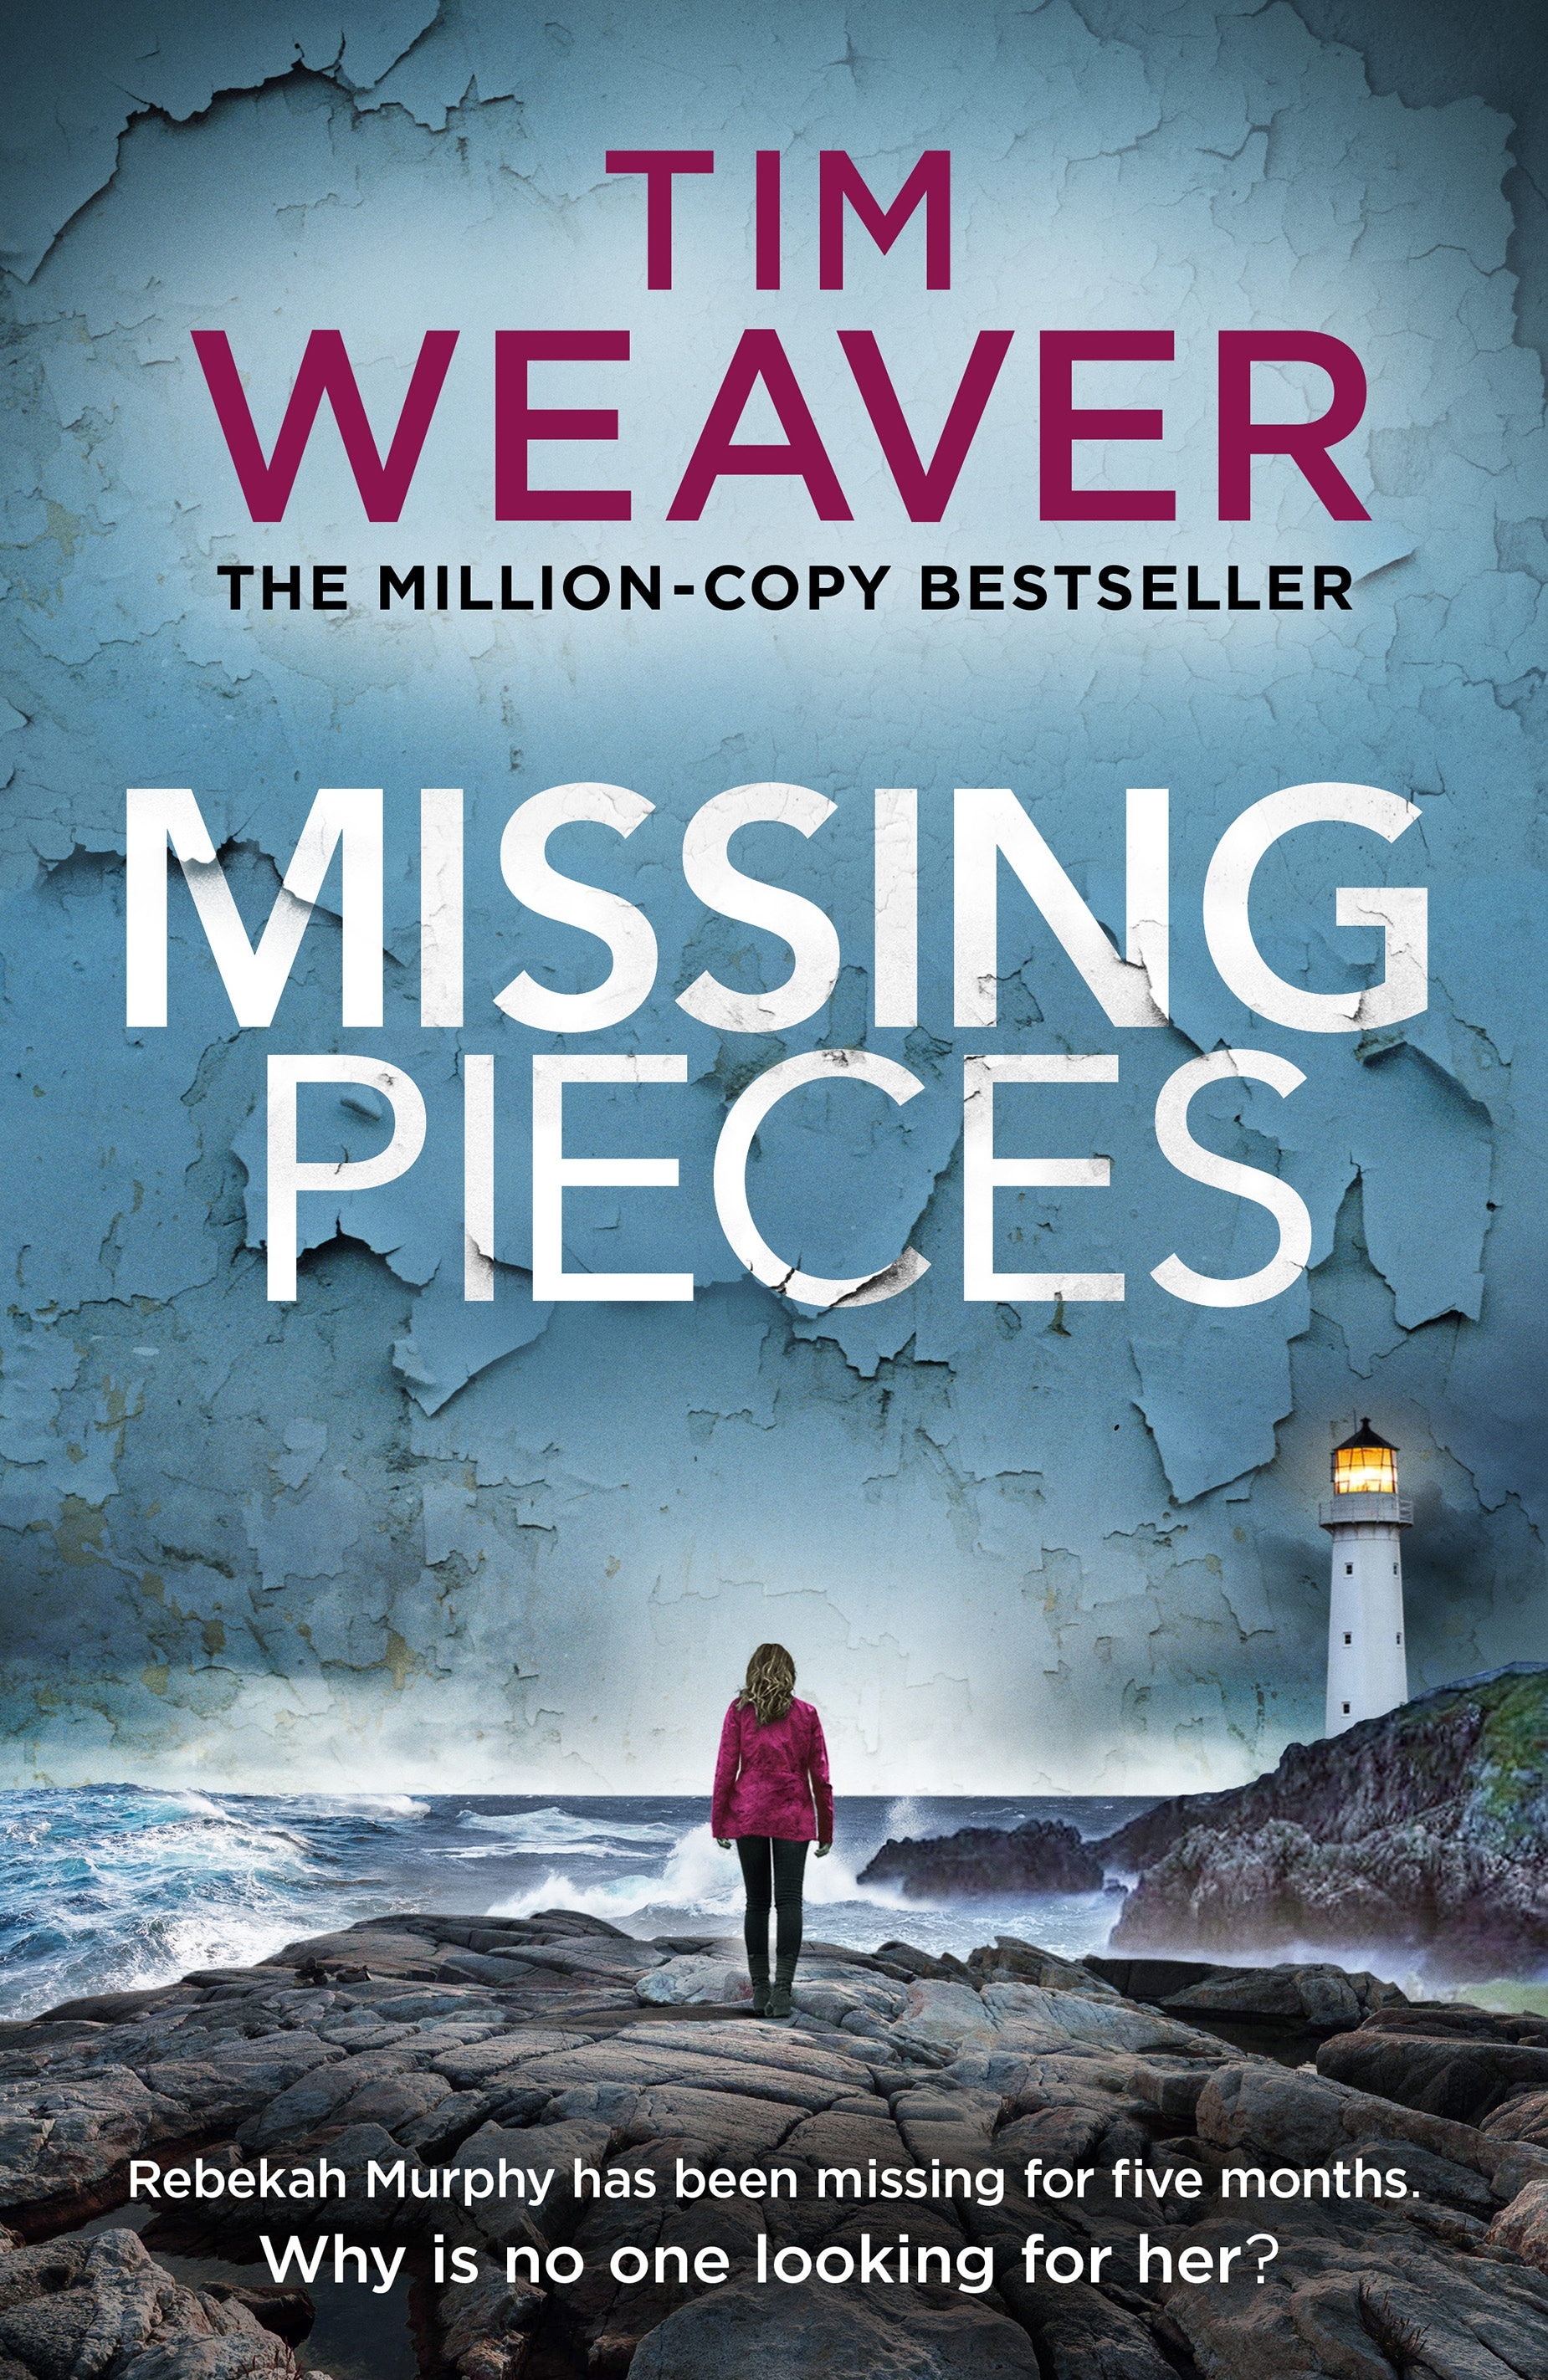 Book “Missing Pieces” by Tim Weaver — April 15, 2021